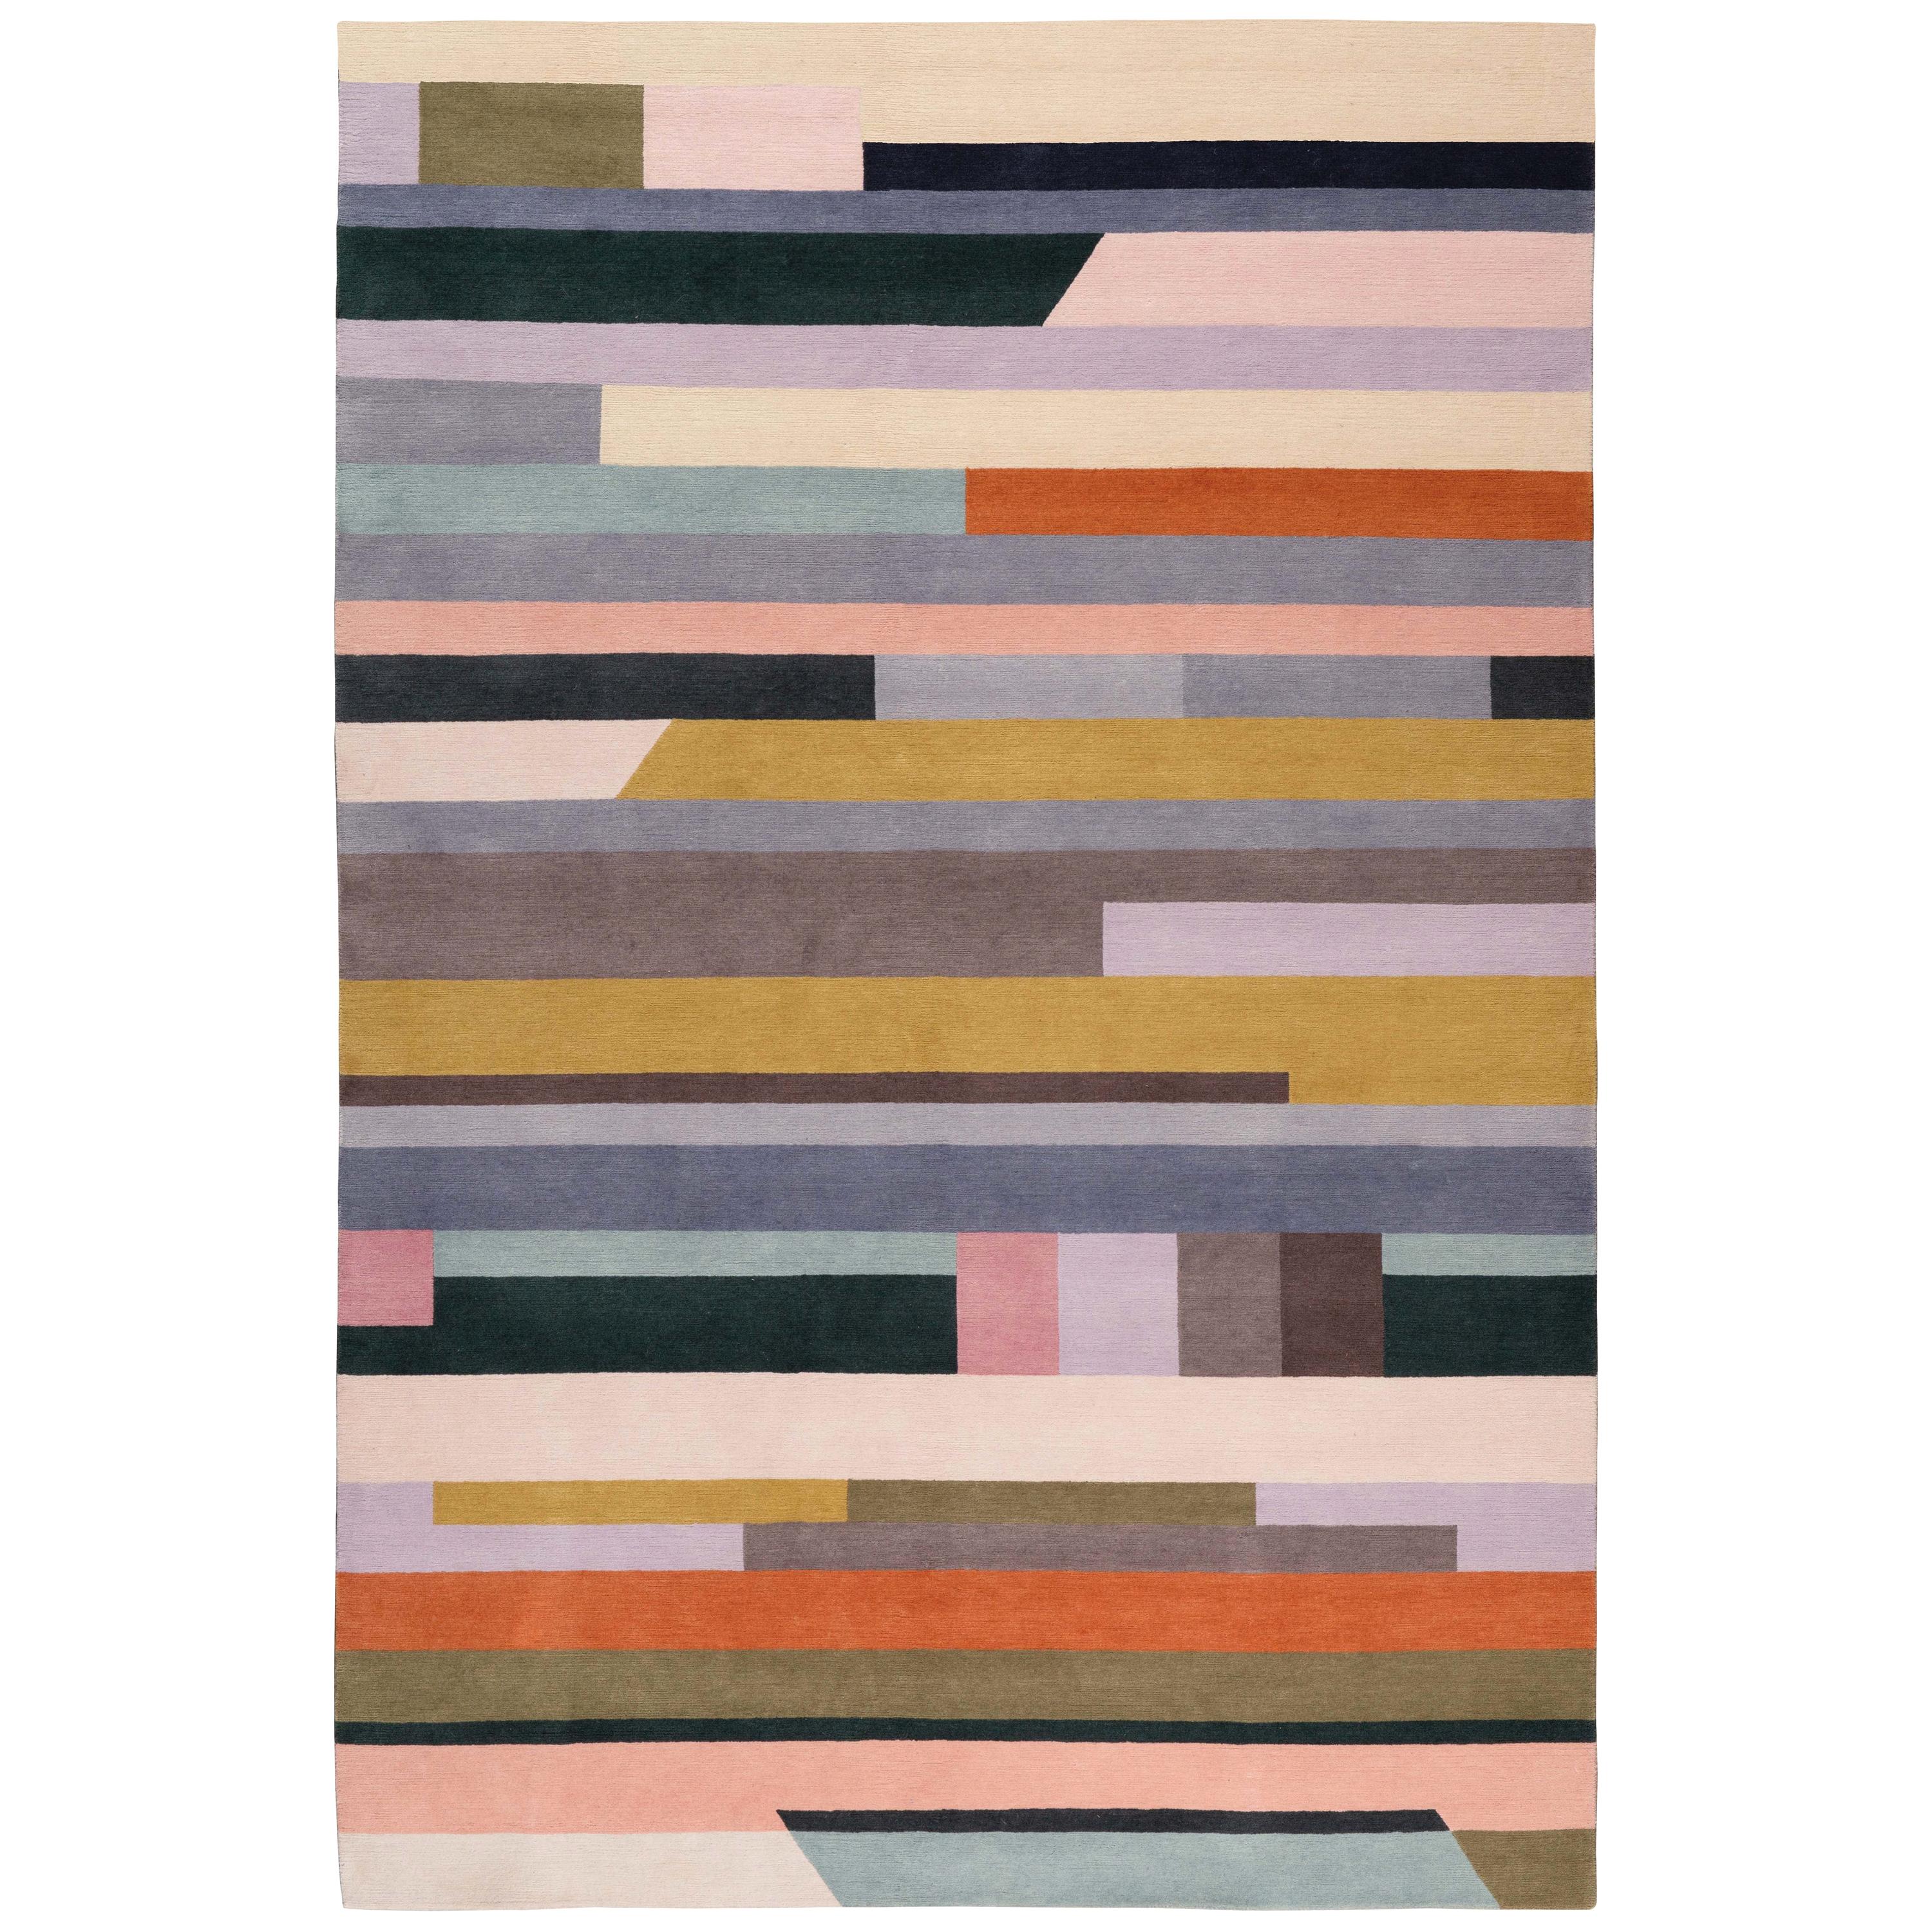 Interval Hand-knotted 10'x8' Rug in Wool by Paul Smith